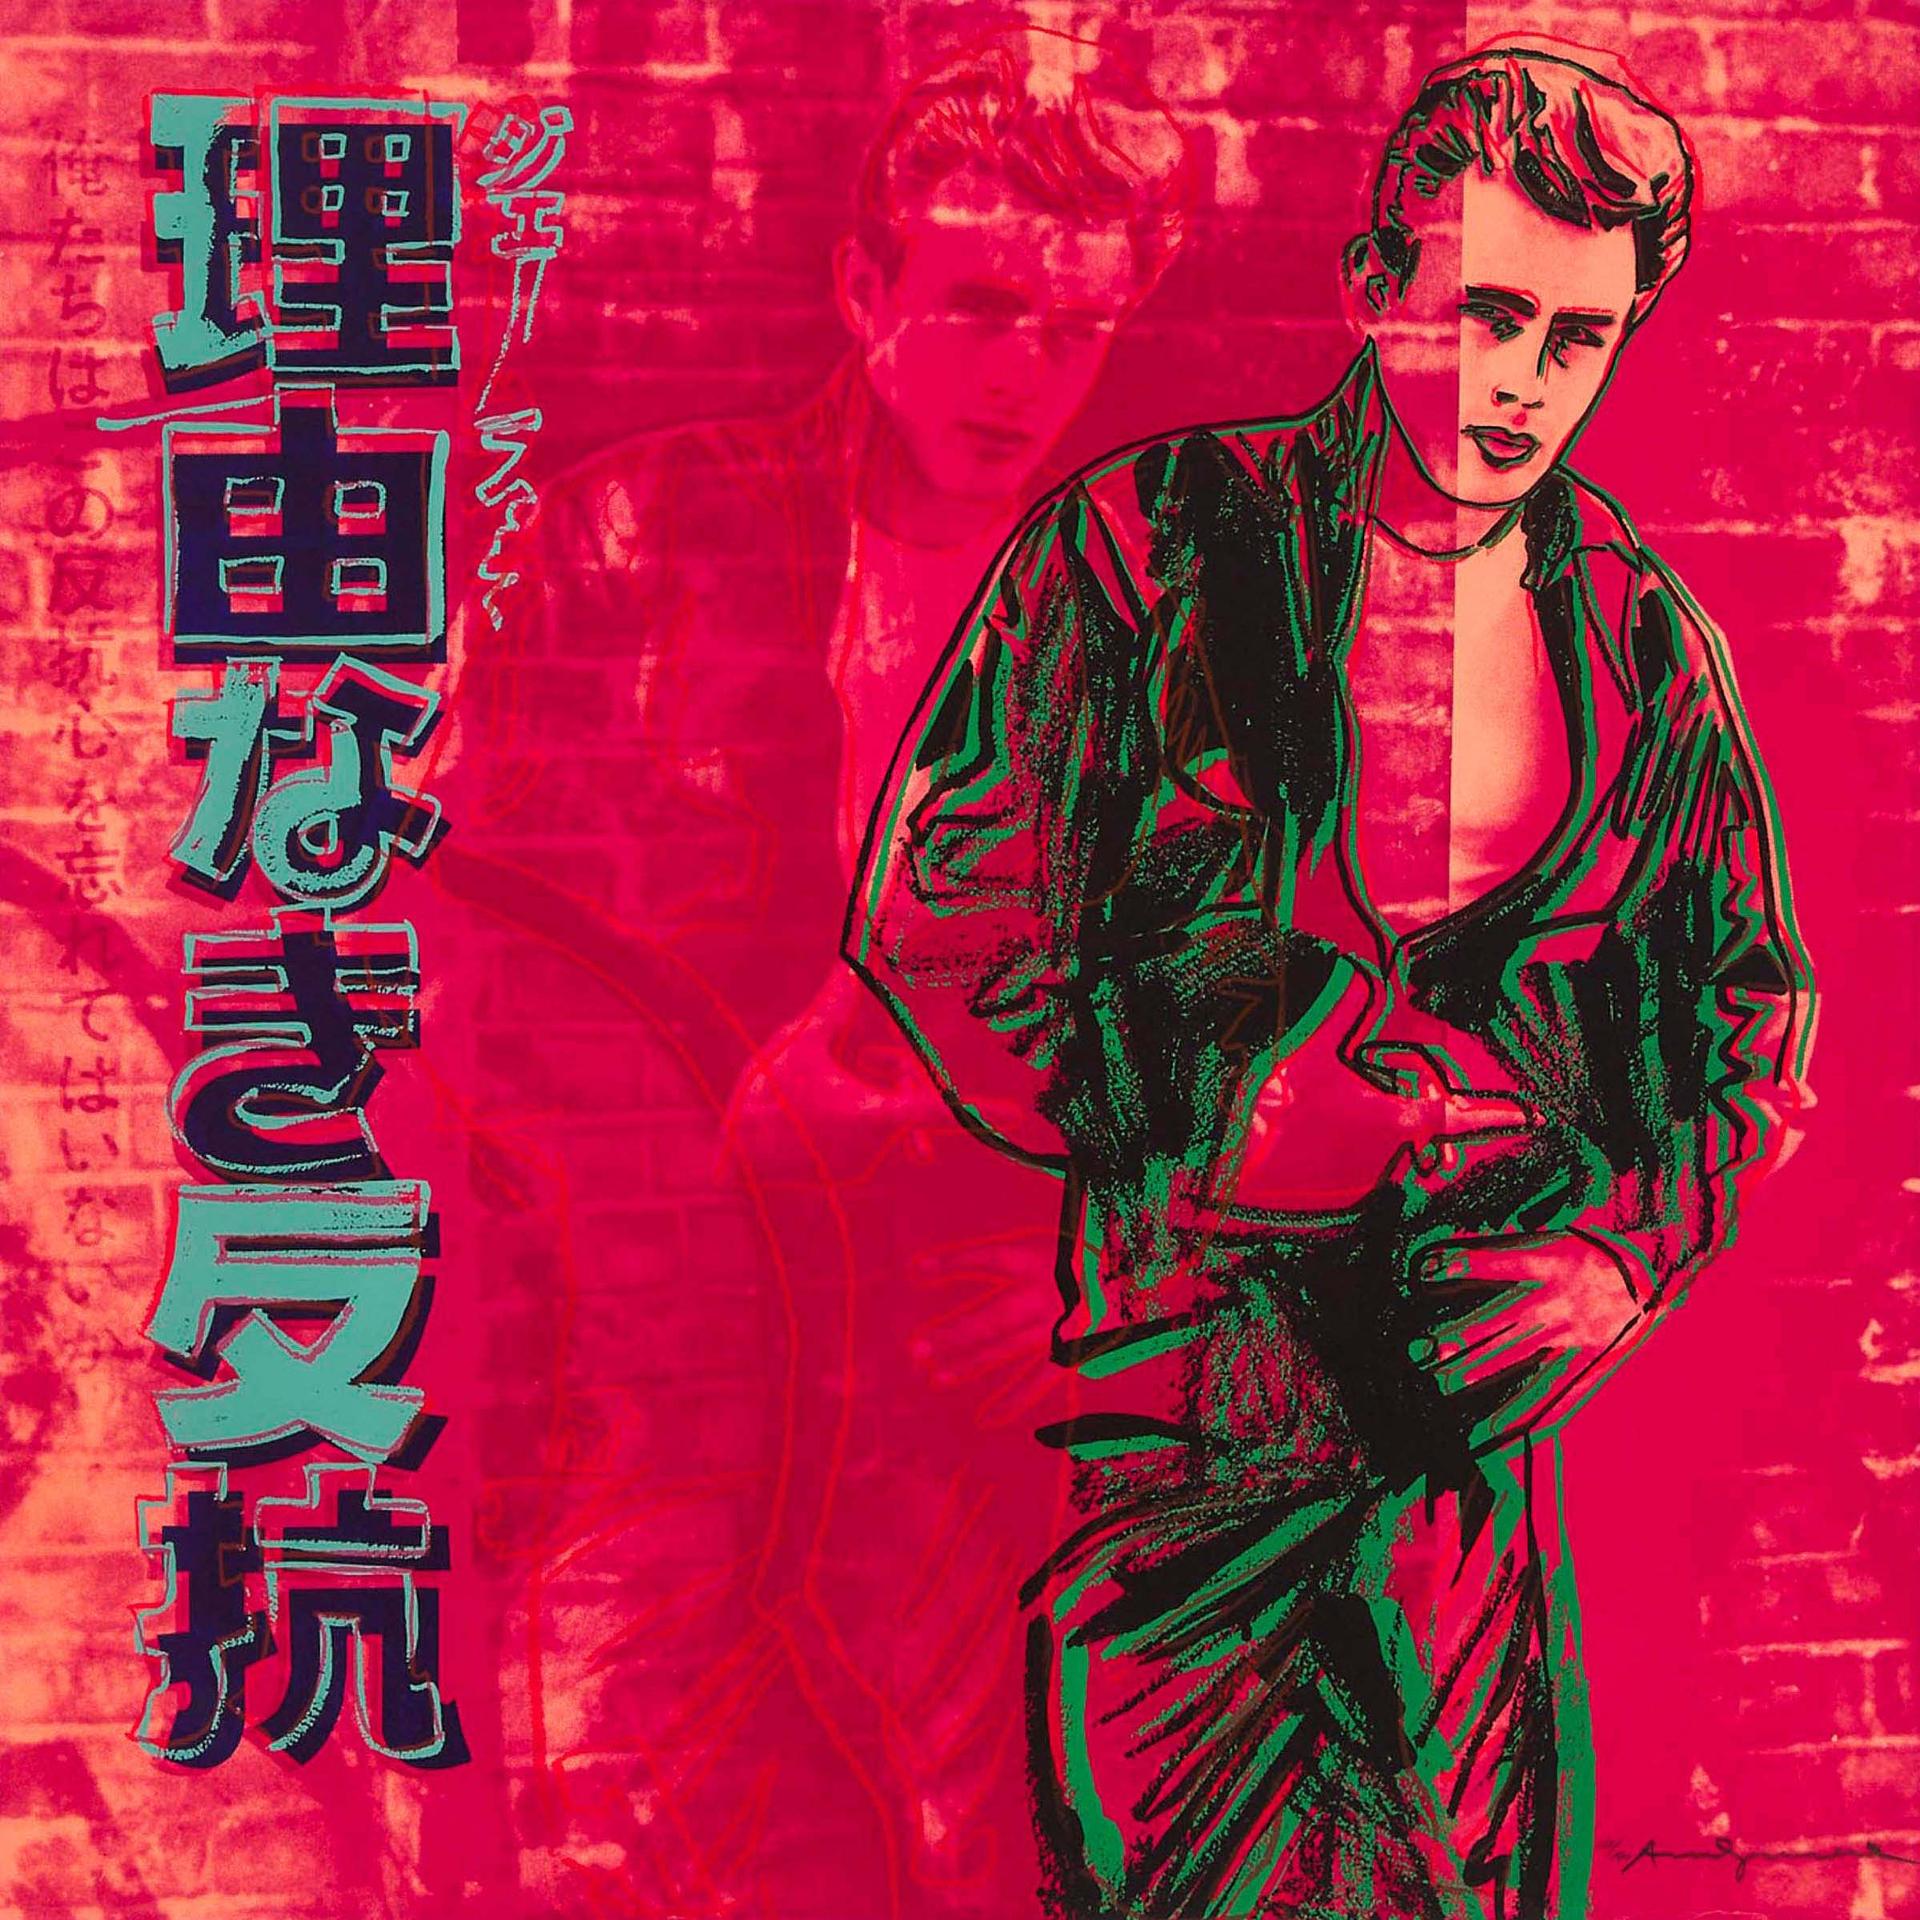 Andy Warhol (1928-1987) - Rebel Without A Cause (James Dean), From 